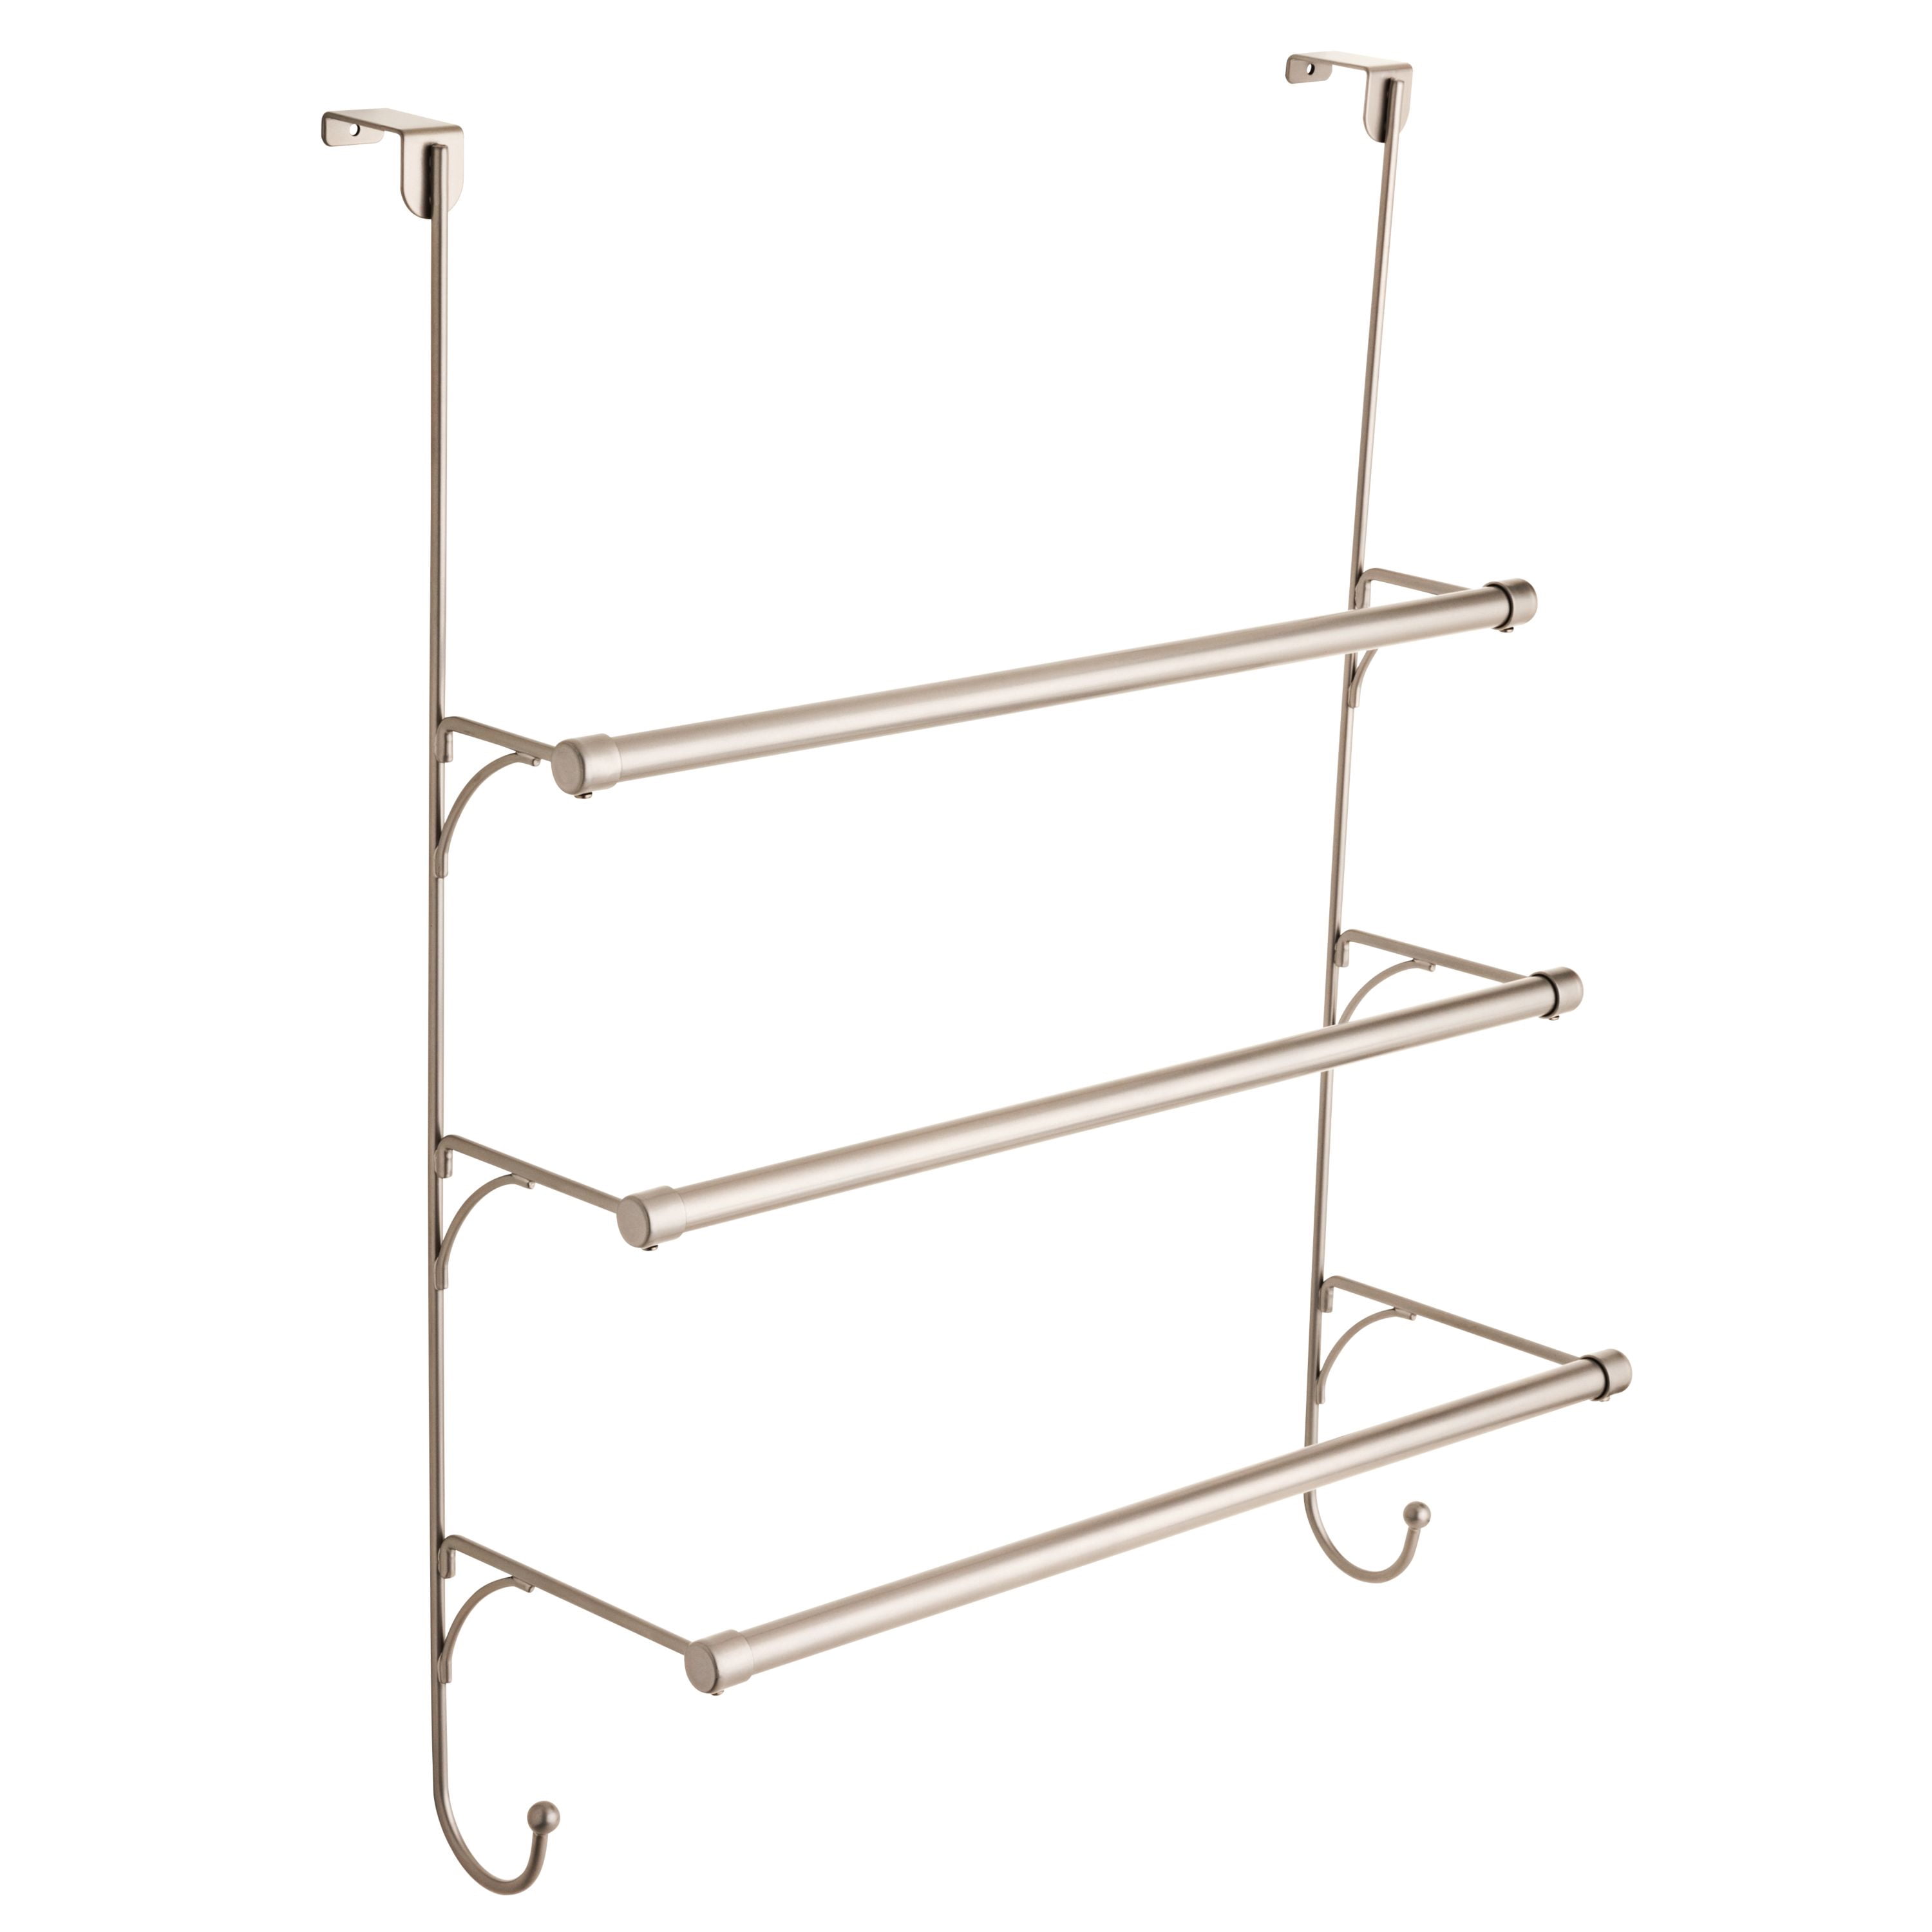 Non-punching Cylindrical Head 3 Strokes Towel Rack